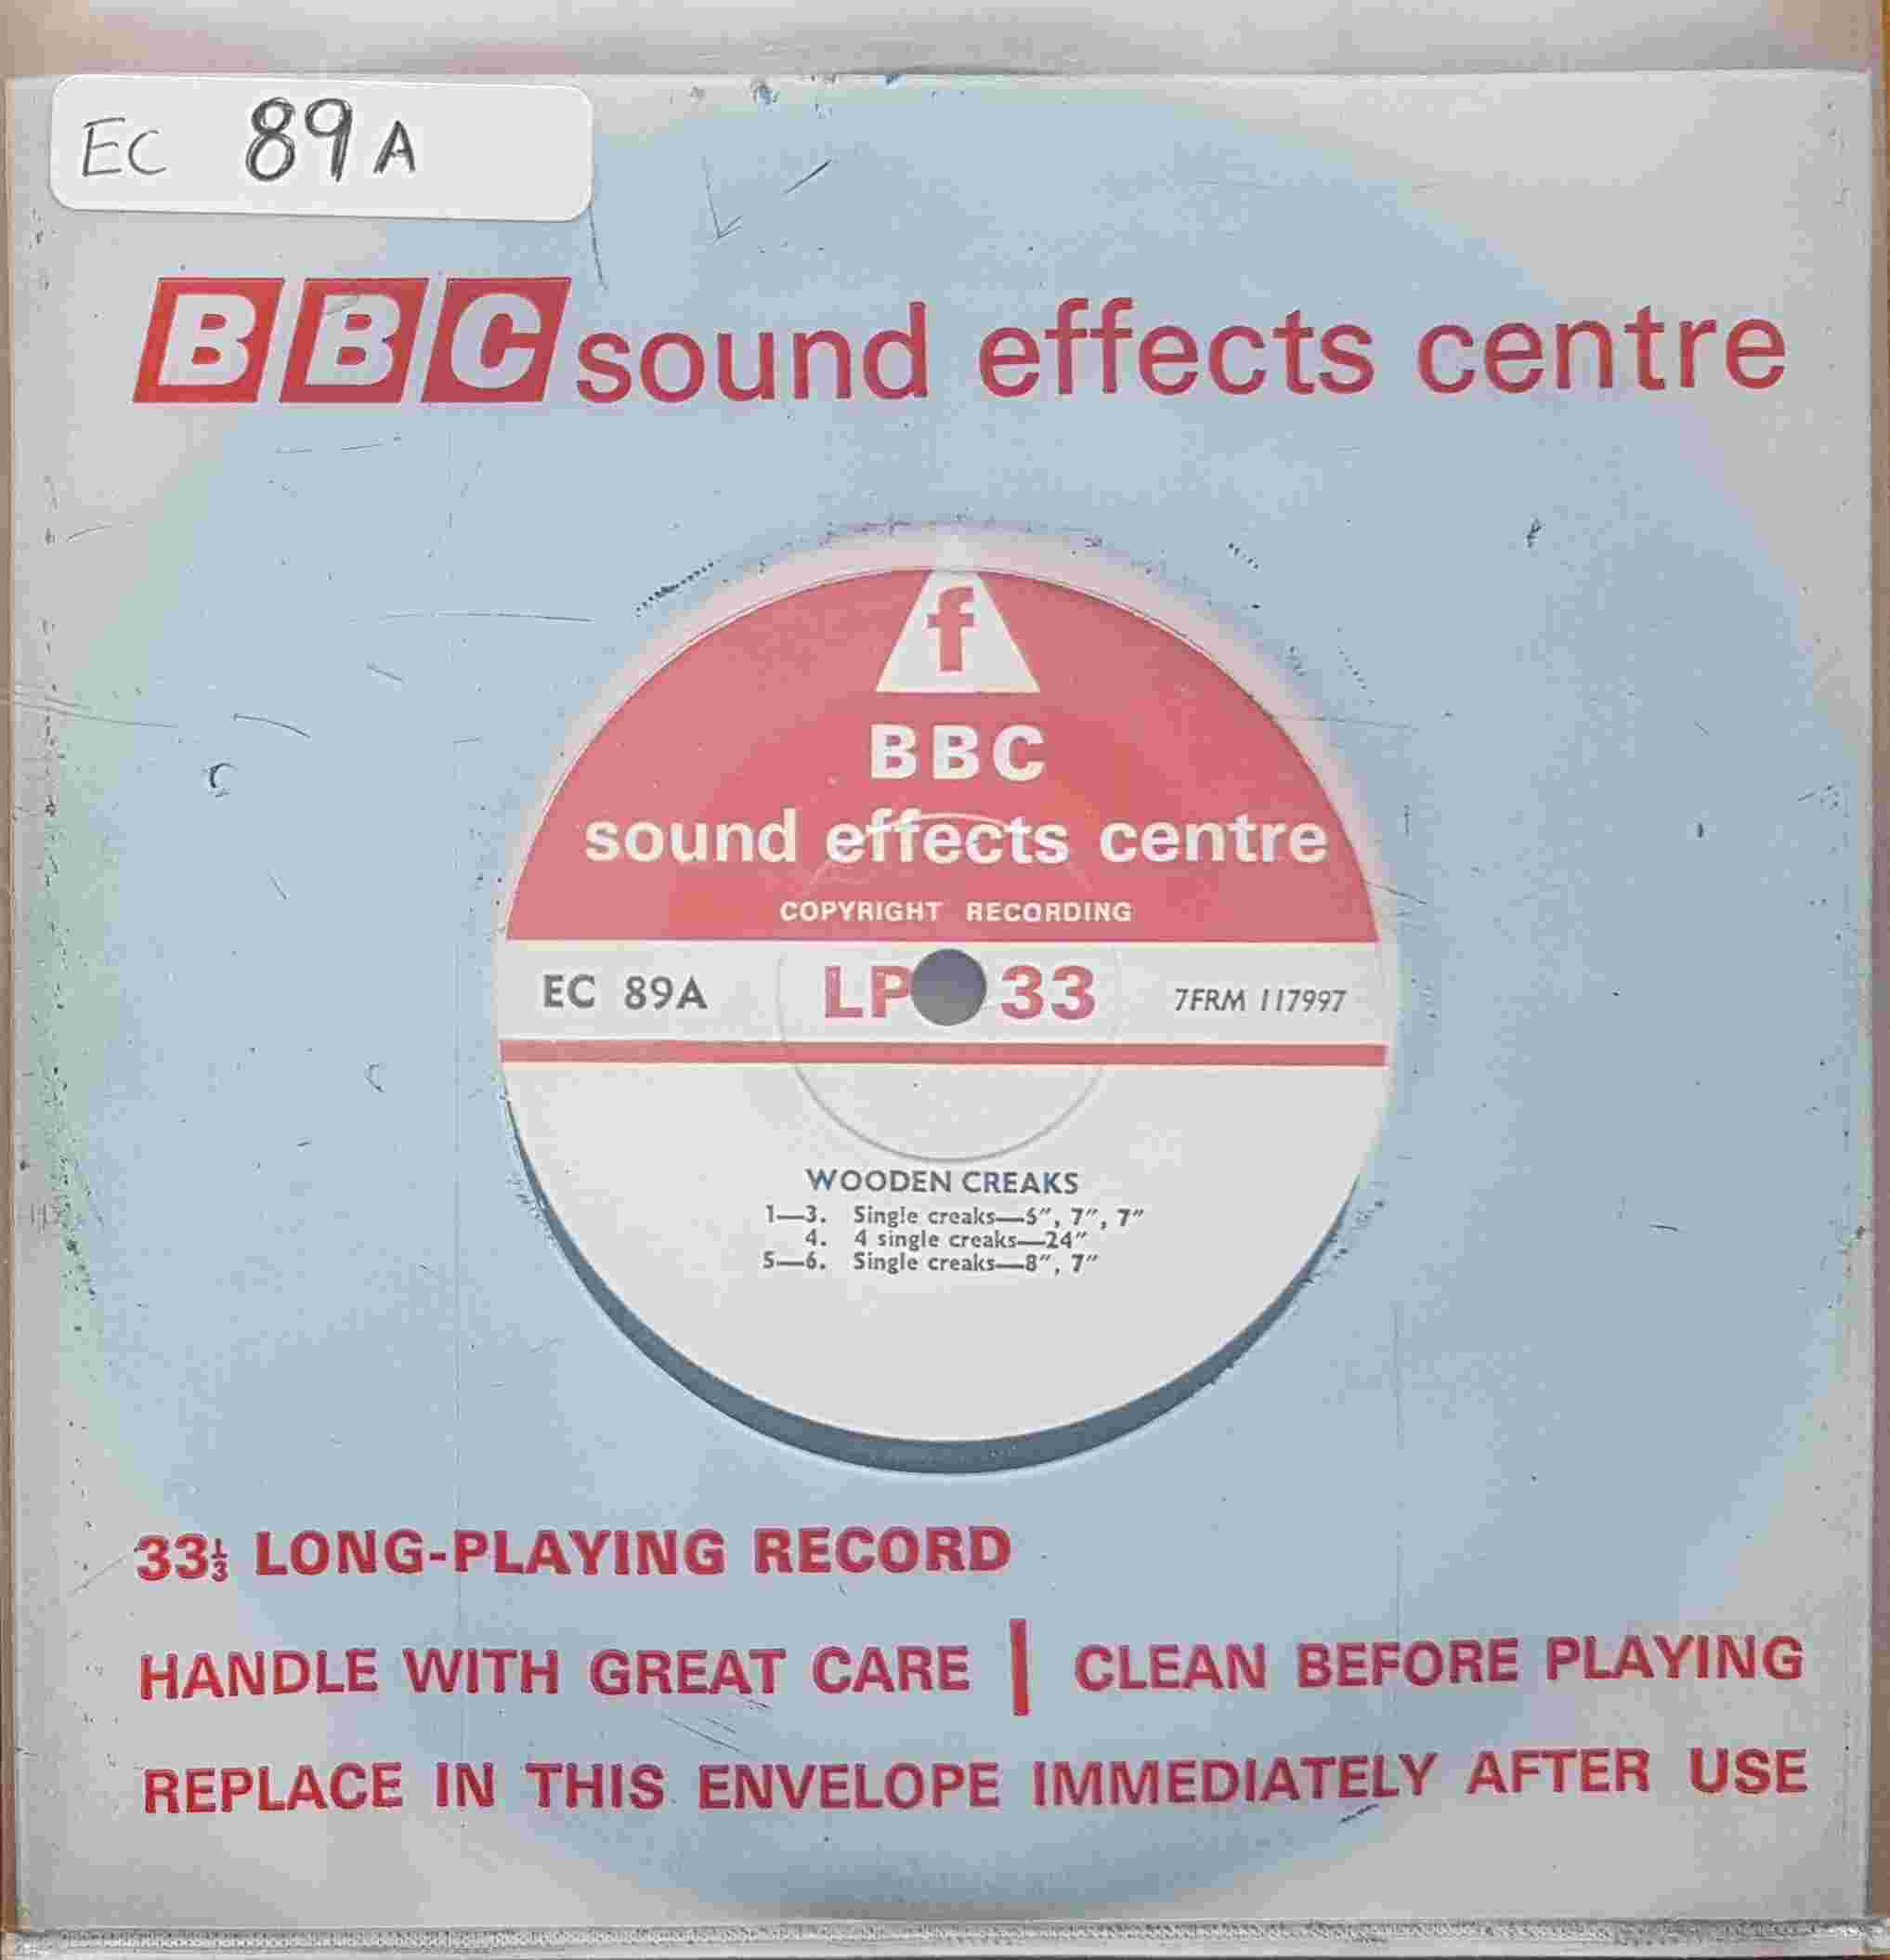 Picture of EC 89A Wooden creaks by artist Not registered from the BBC singles - Records and Tapes library